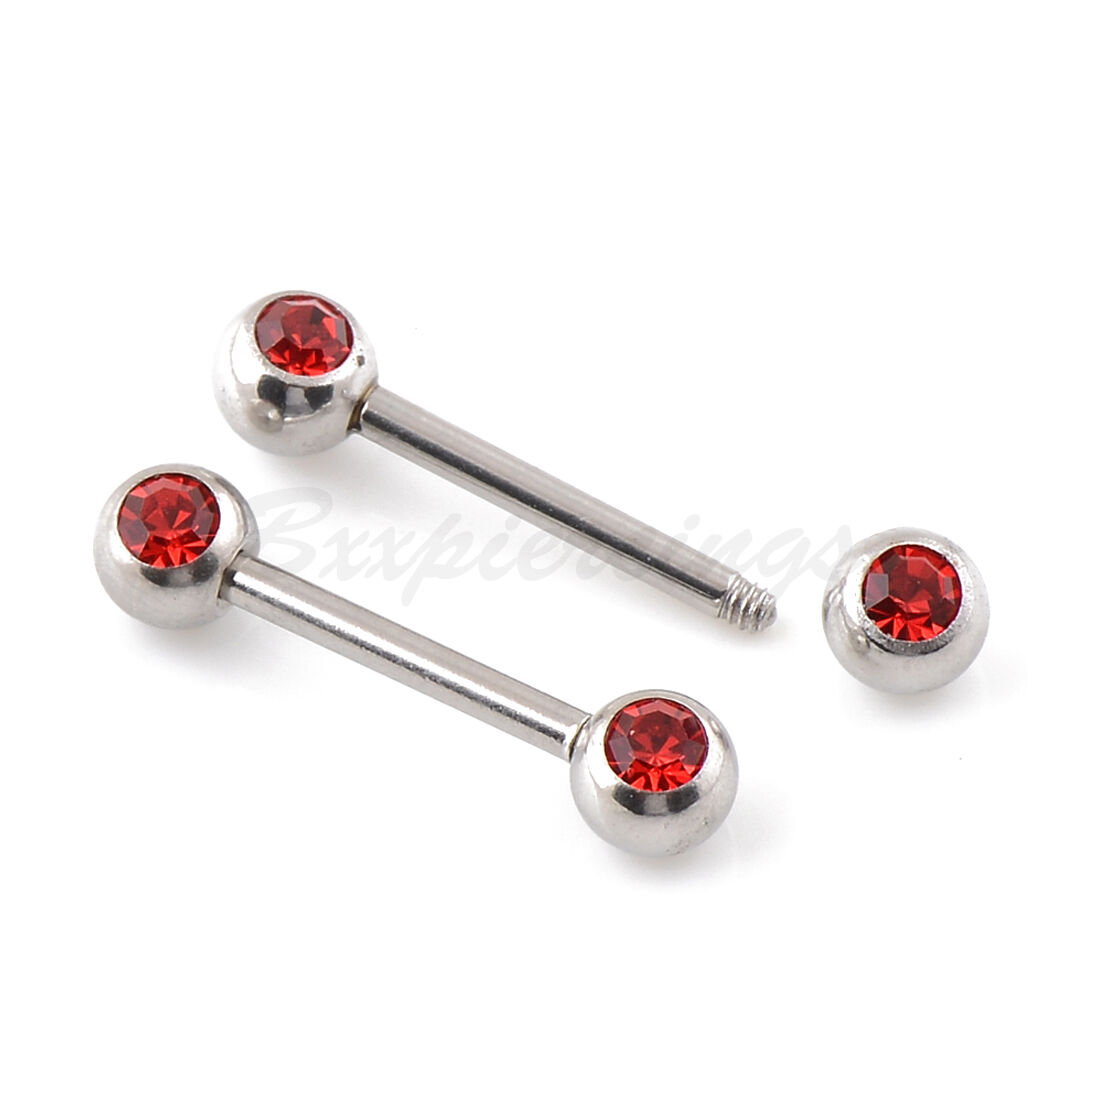 10 pcs 14G 12mm (1/2") Double 5mm Gem Tongue Barbell Surgical Steel Nipple Ring Bxxpiercings - фотография #3